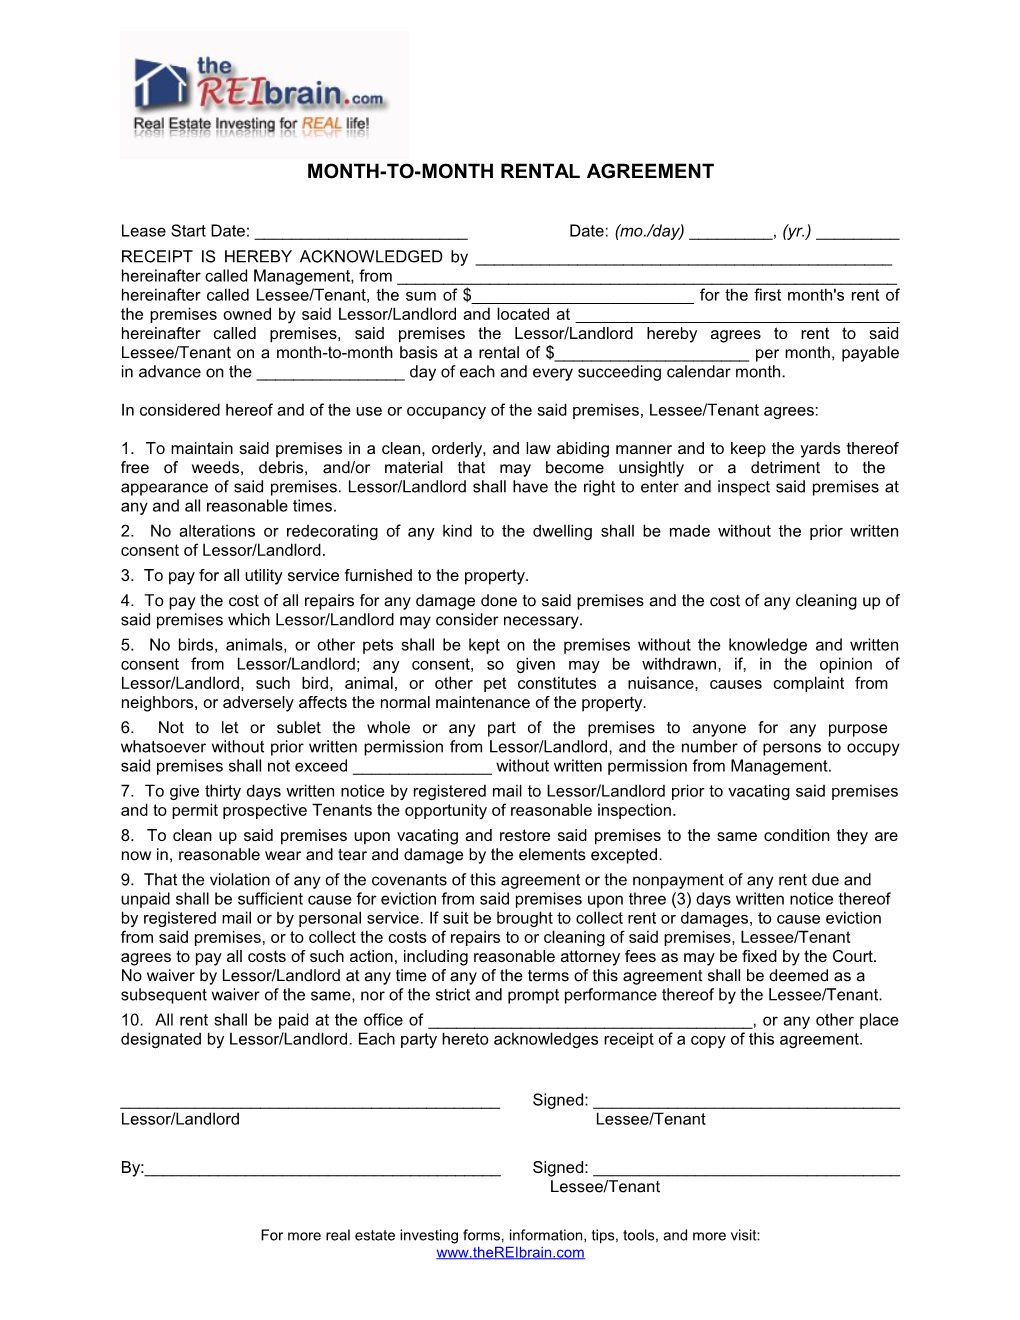 Month-To-Month Rental Agreement